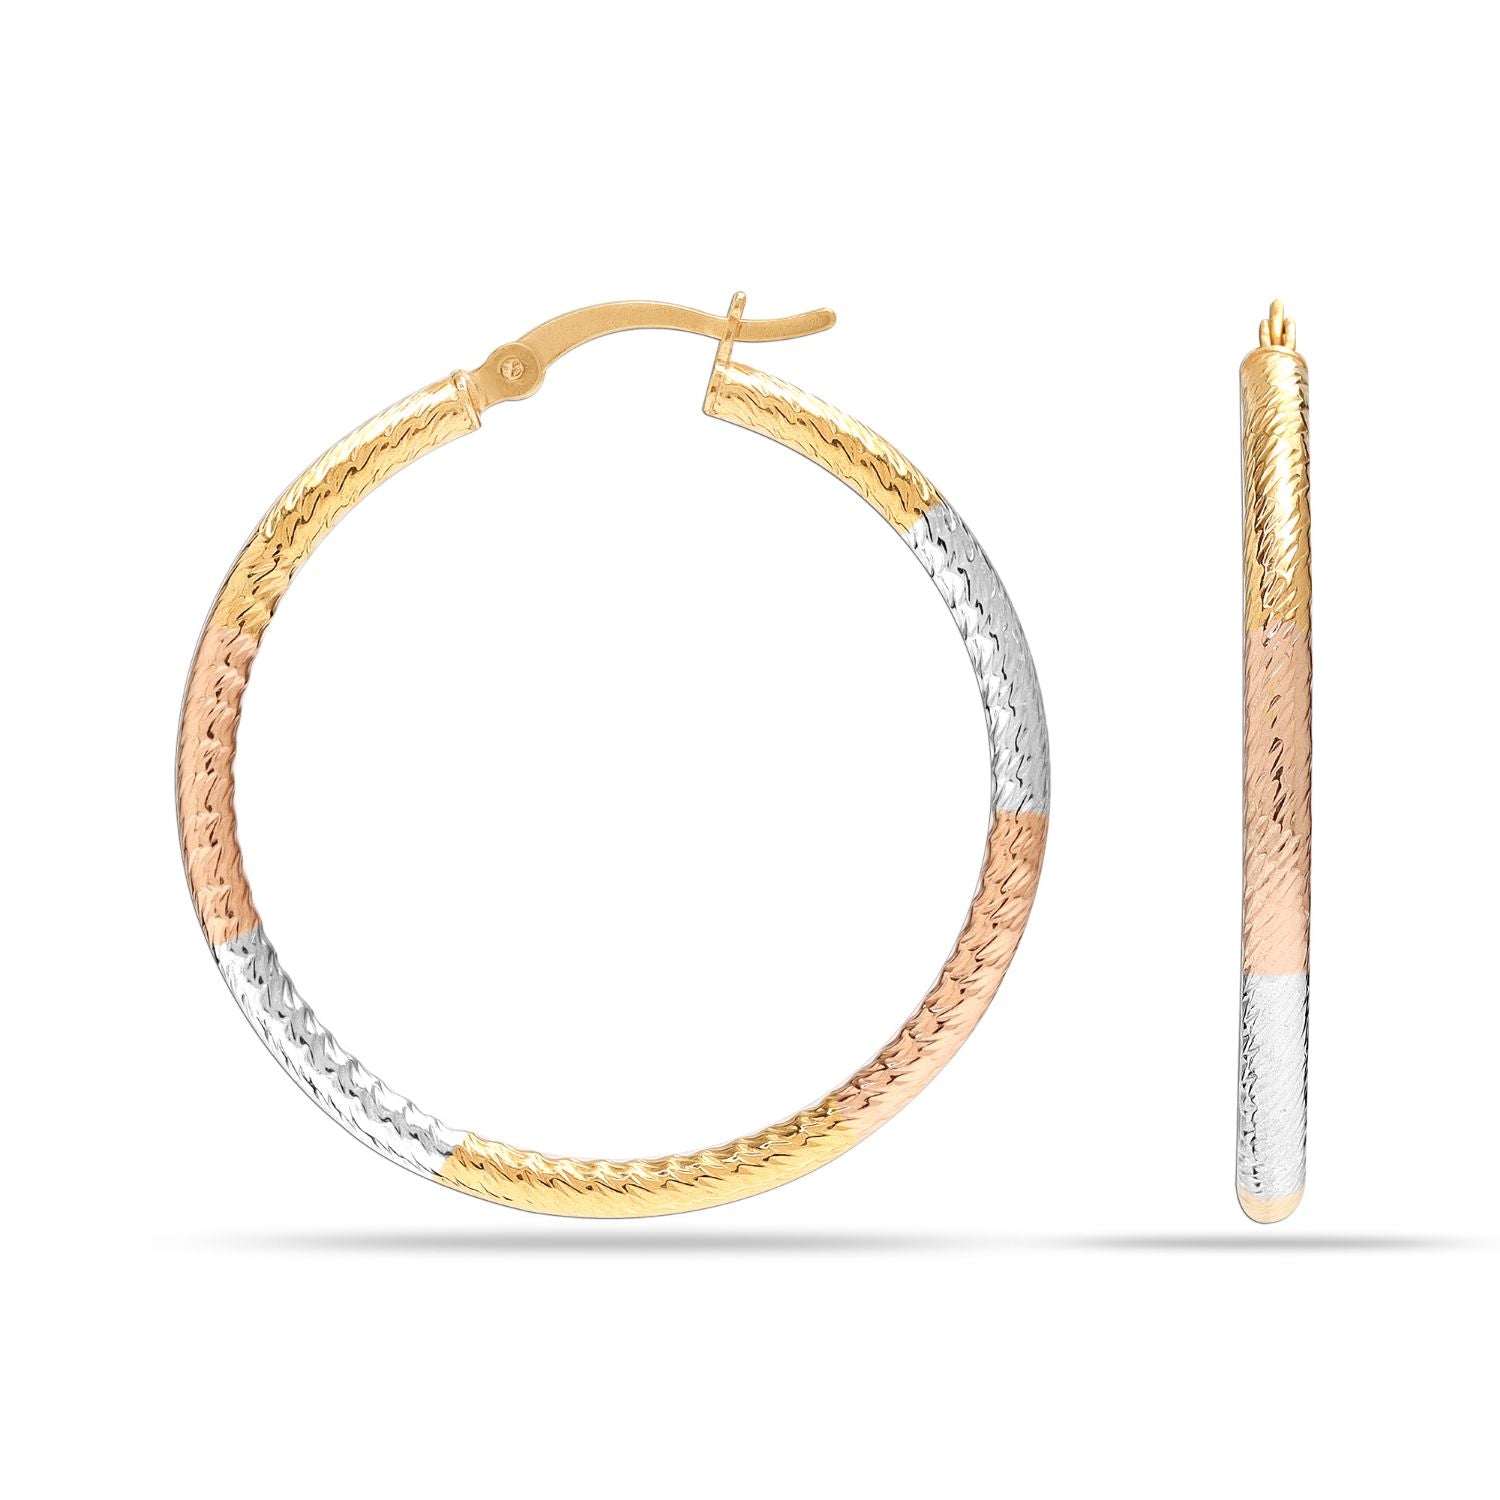 925 Sterling Silver Jewellery Three-Tone Textured Round Light-Weight Hoop Earrings for Women 35mm